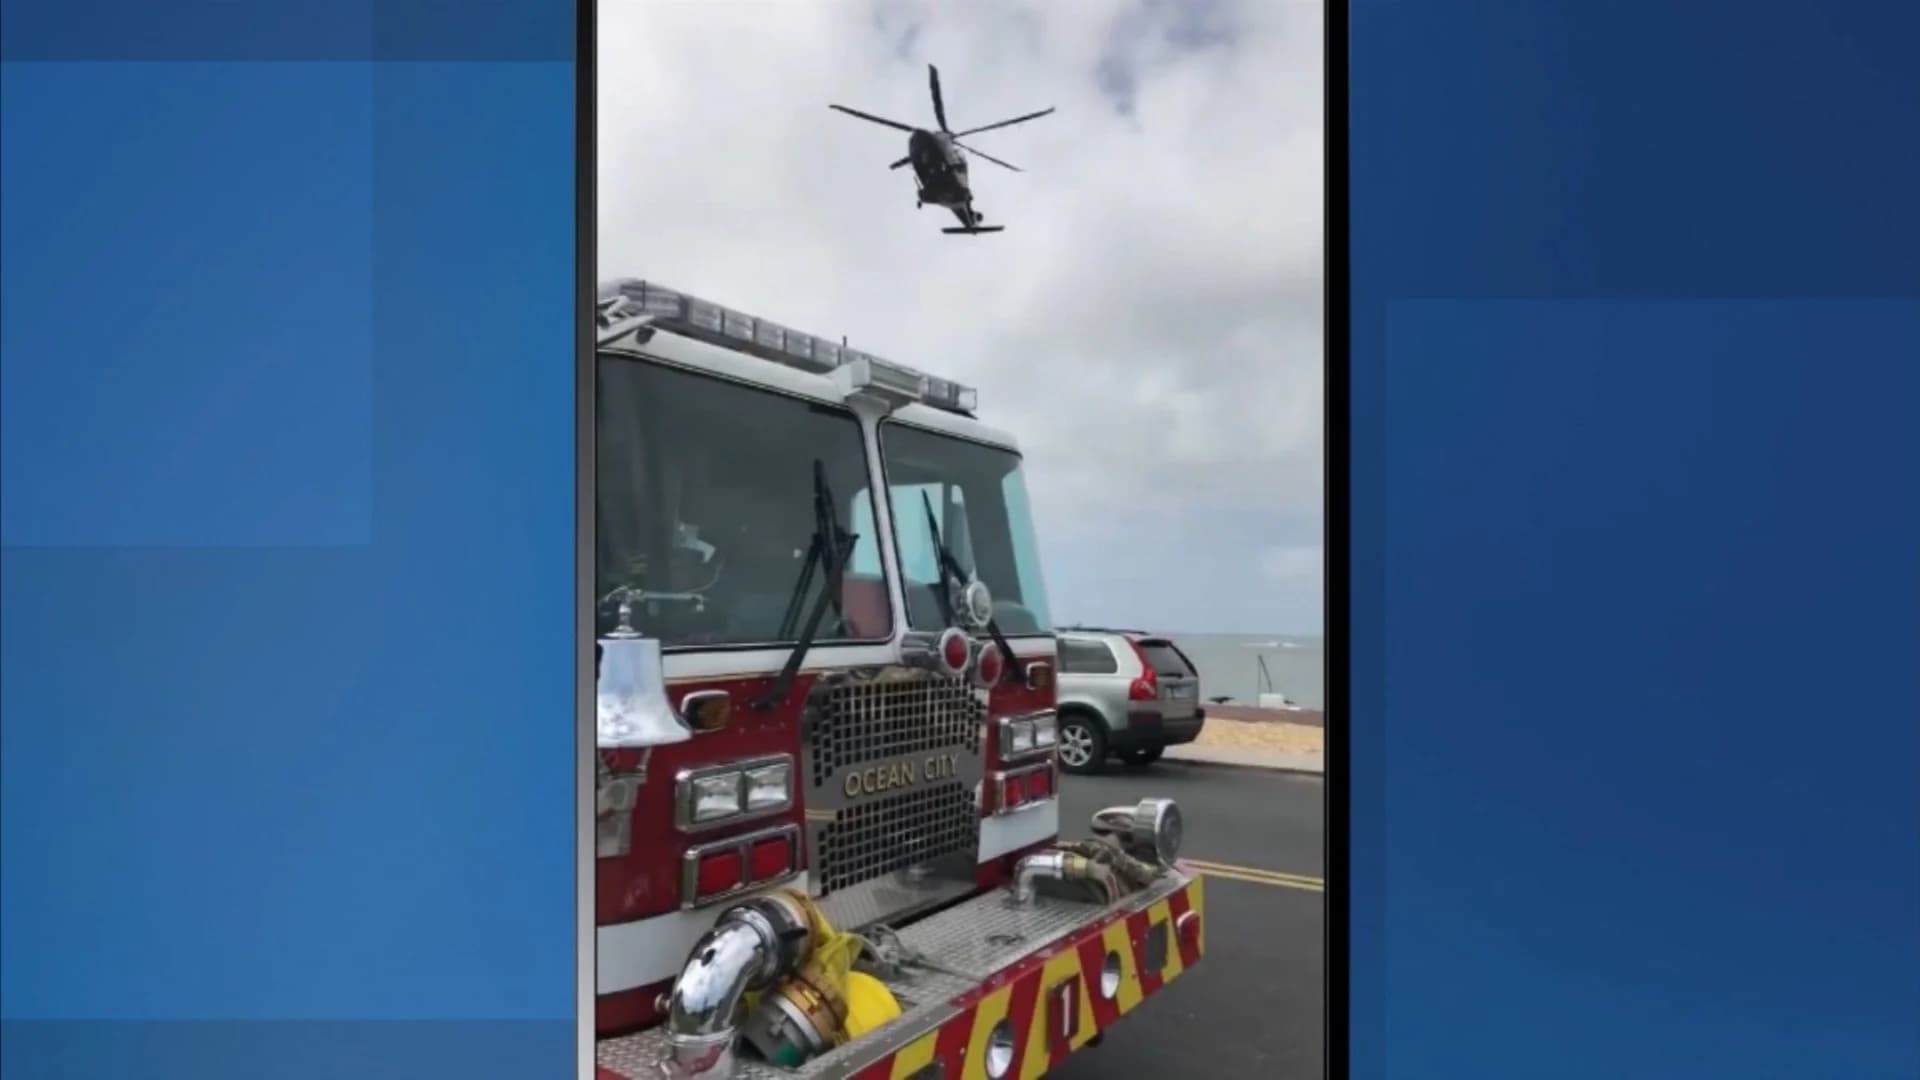 Woman impaled by beach umbrella thanks rescuers